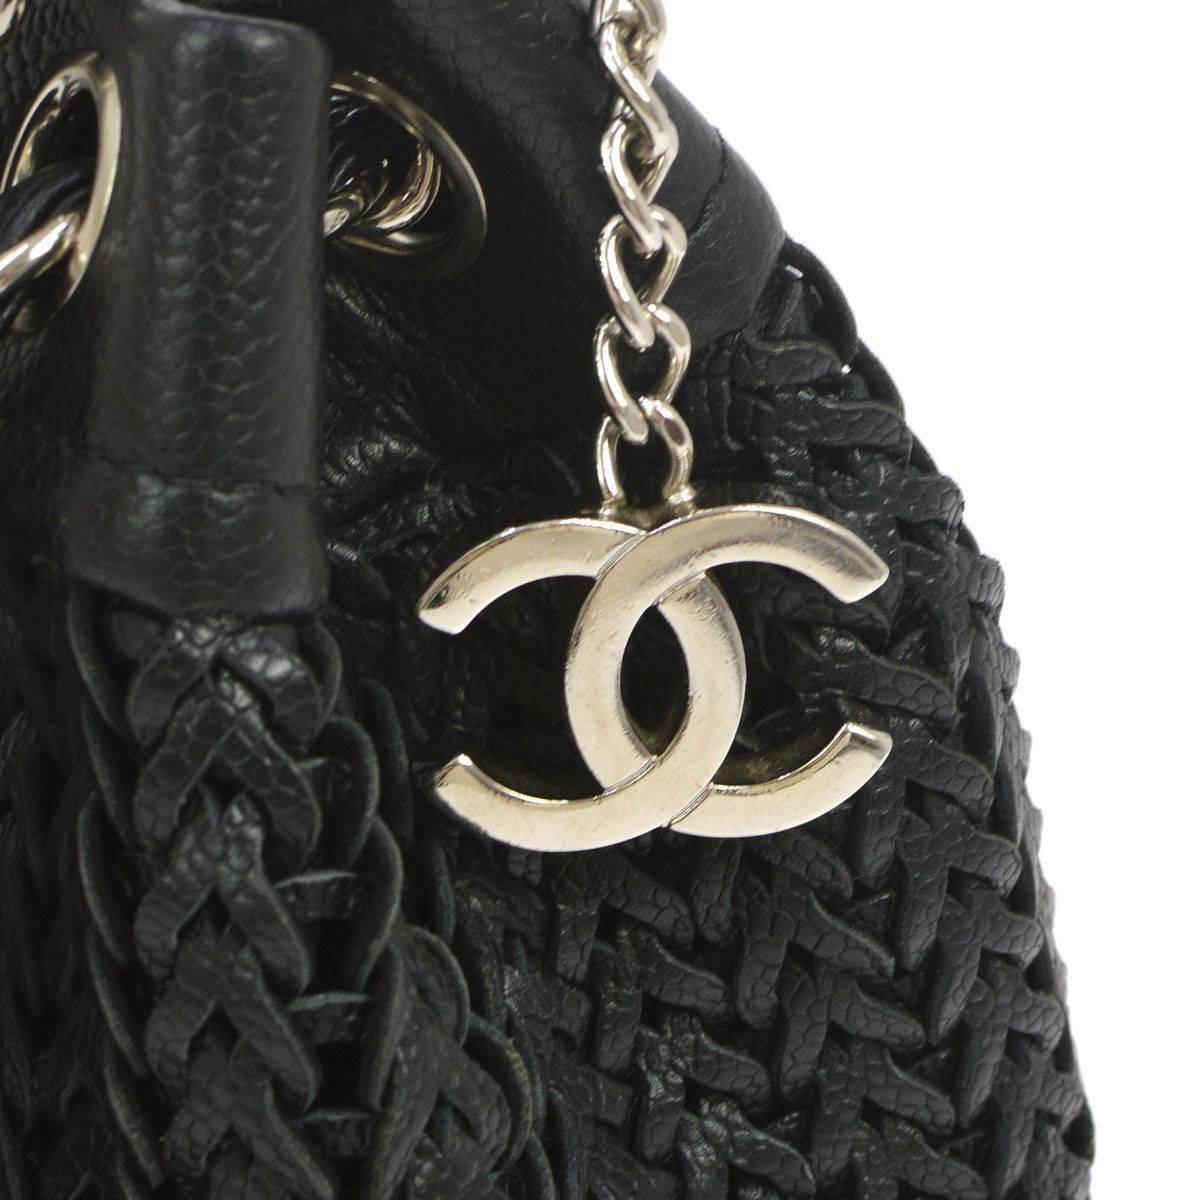 CURATOR'S NOTES

Chanel Black Caviar Leather Charm Drawstring Basket Weave Hobo Shoulder Bag  

Caviar leather
Silver tone hardware
Drawstring closure
Made in Italy
Date code 9874587
Shoulder strap drop 11"
Measures 12" W x 8.75" H x